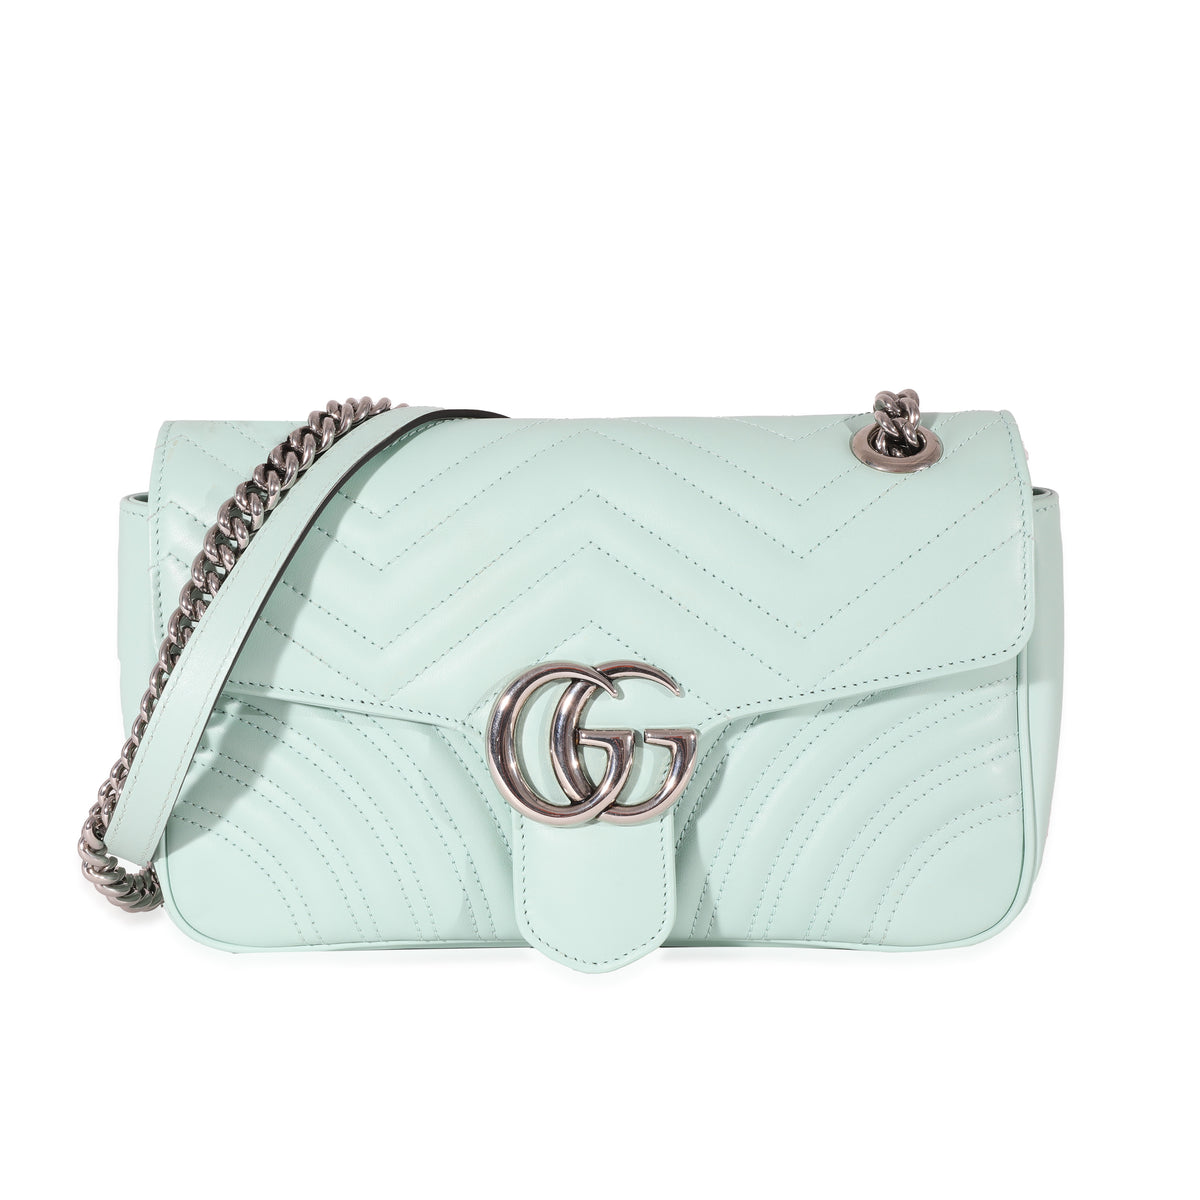 Gucci Water Green Leather Matelassé GG Small Marmont